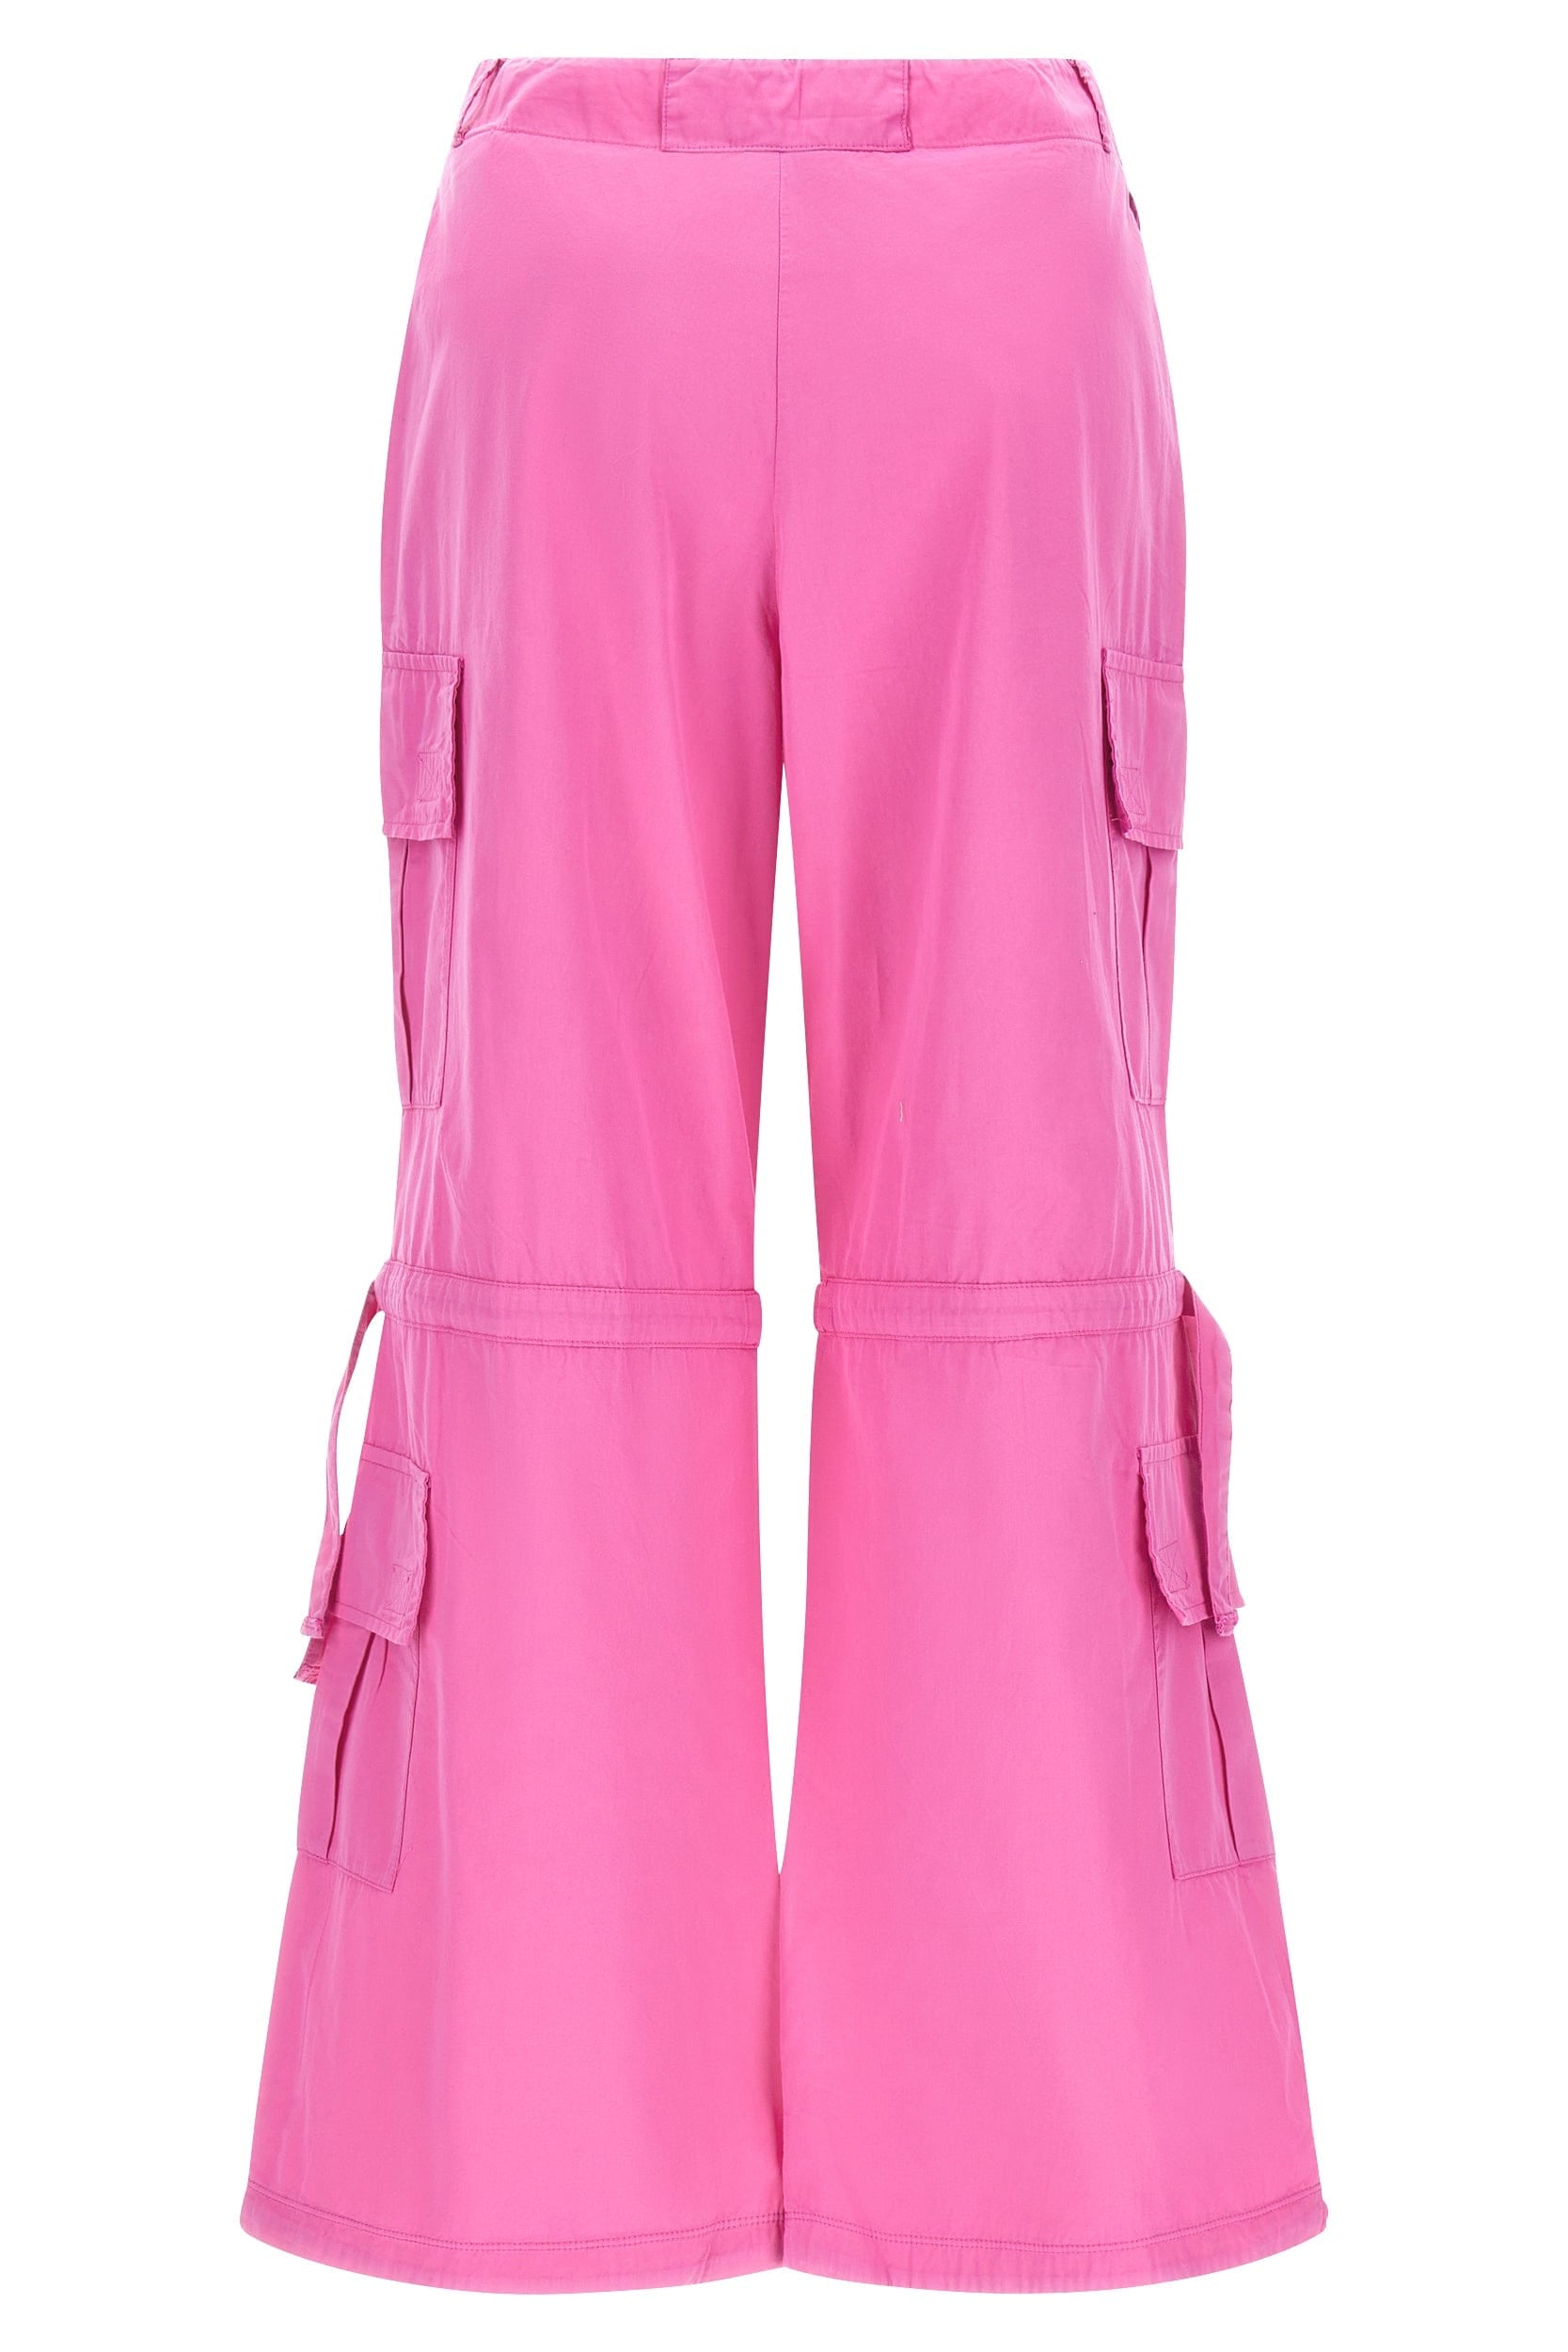 Cargo Trousers - High Waisted - Full Length - Pink 6